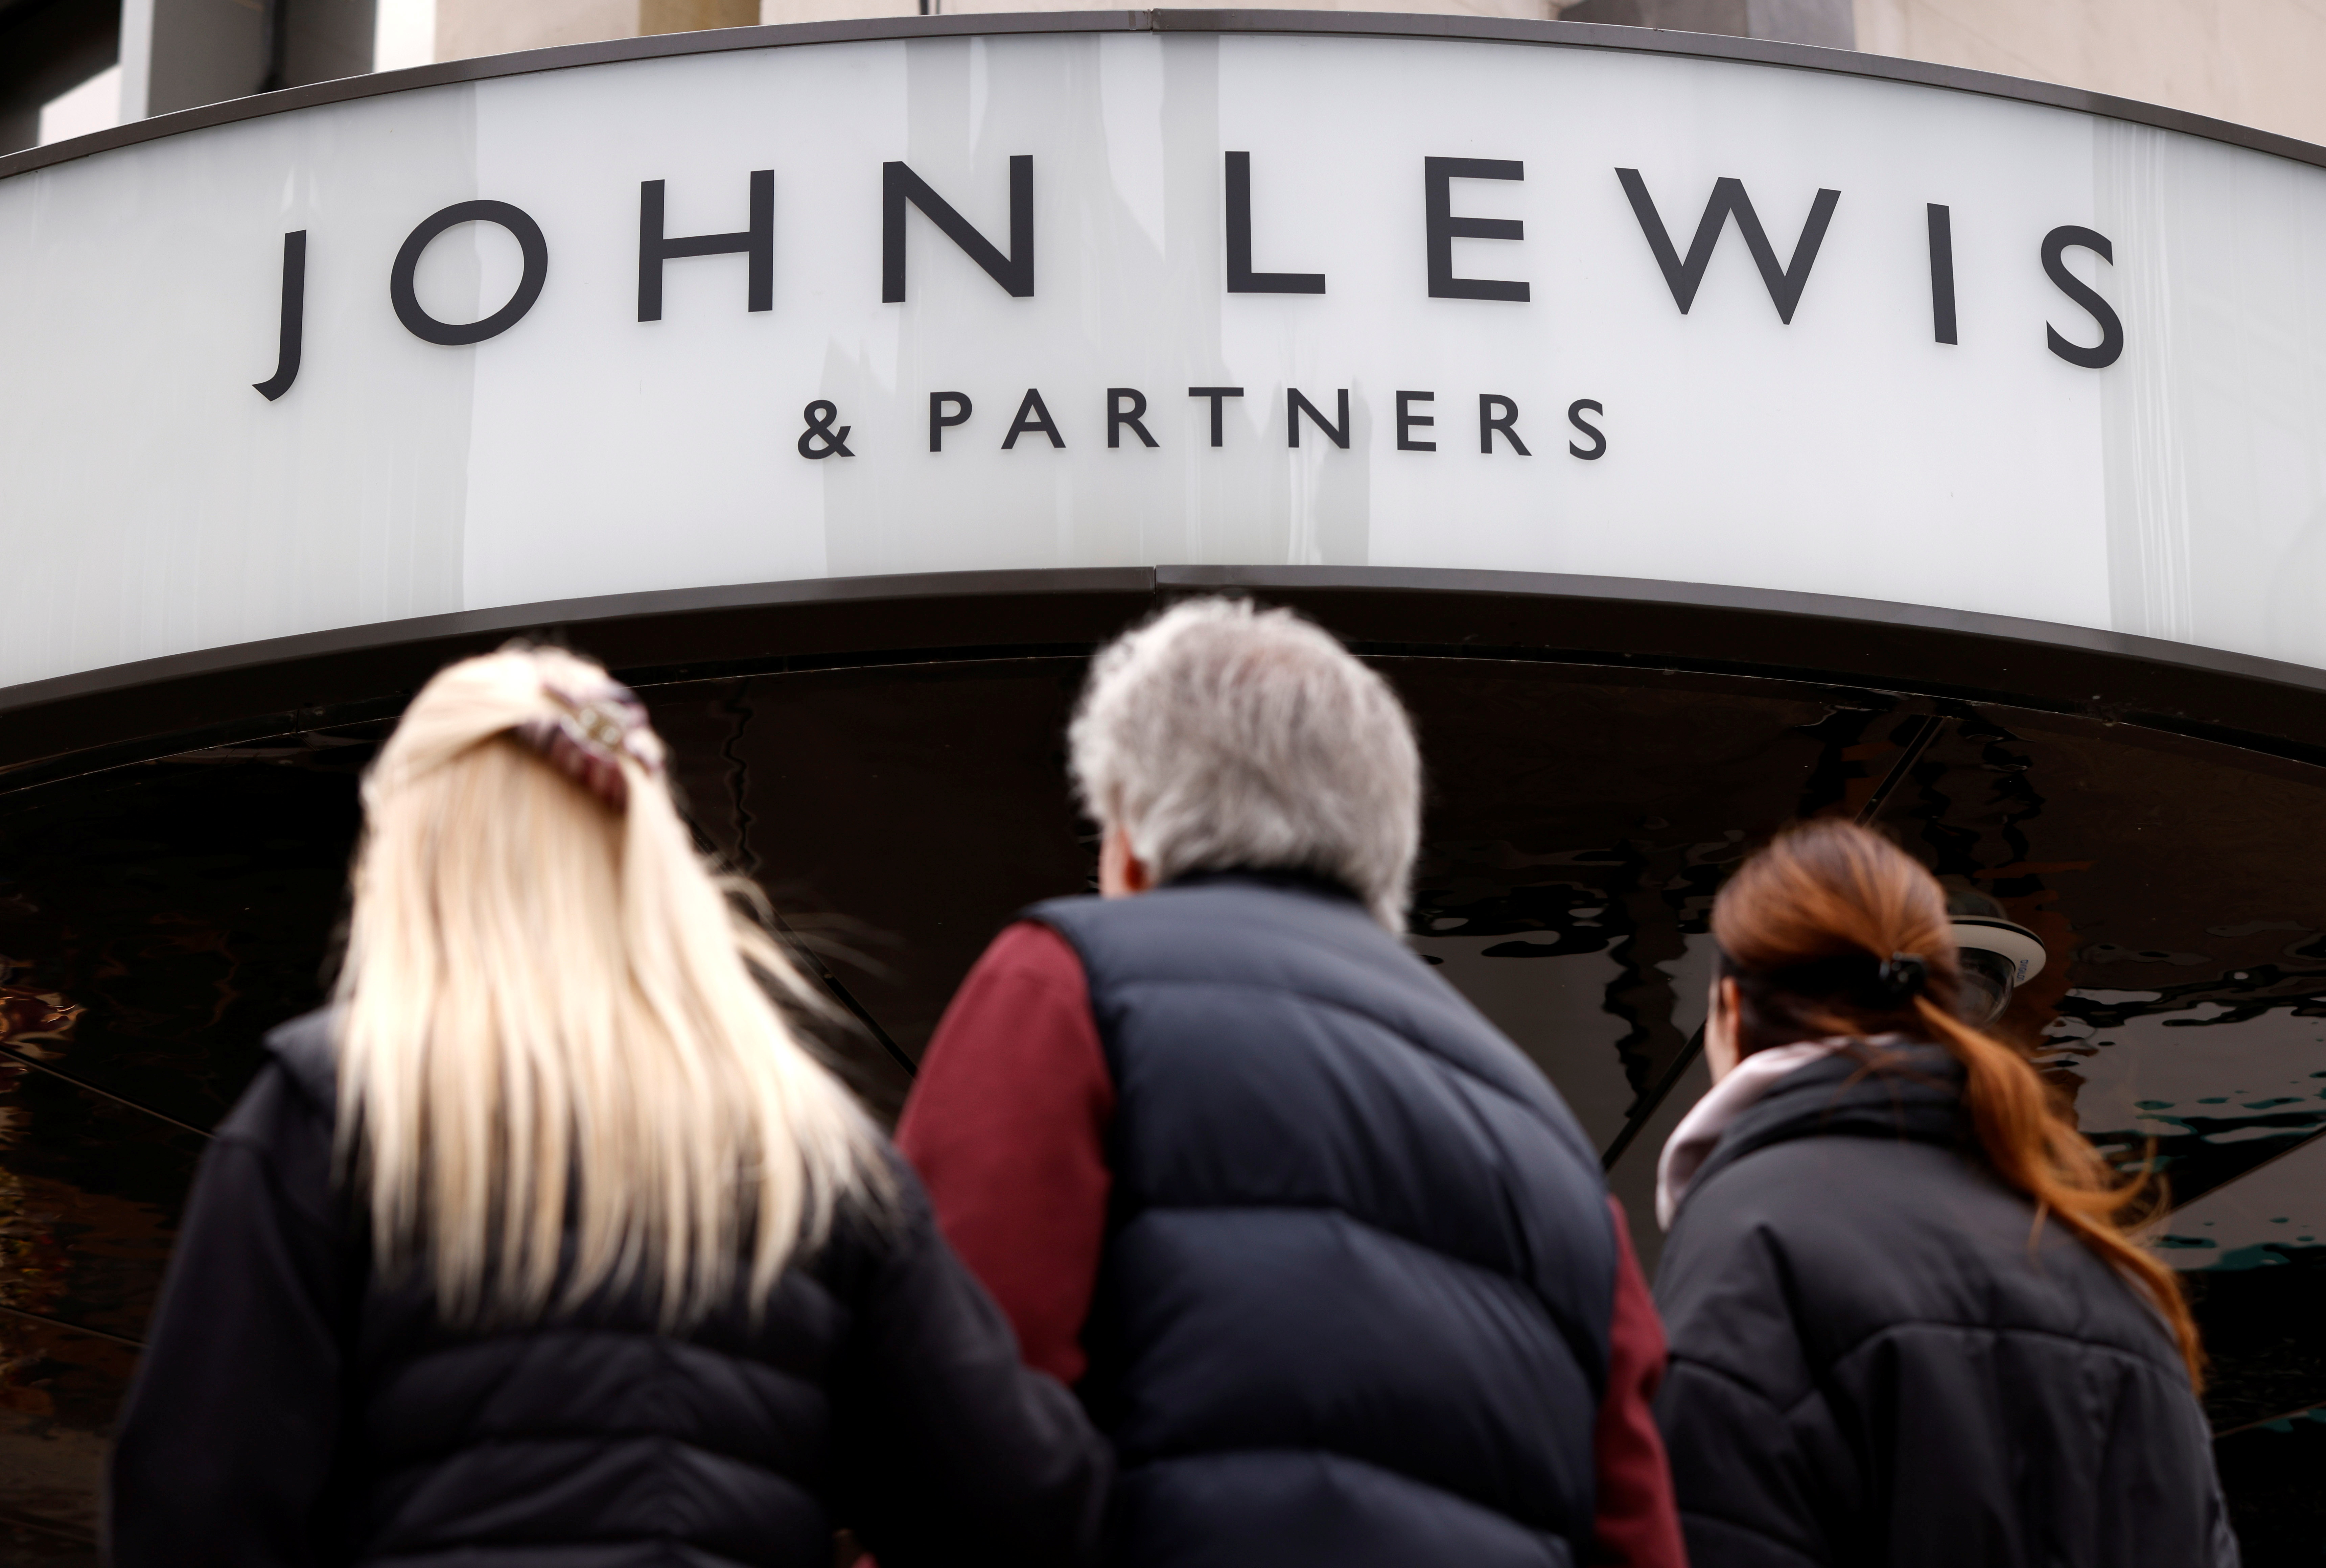 How ethical is John Lewis Plc?